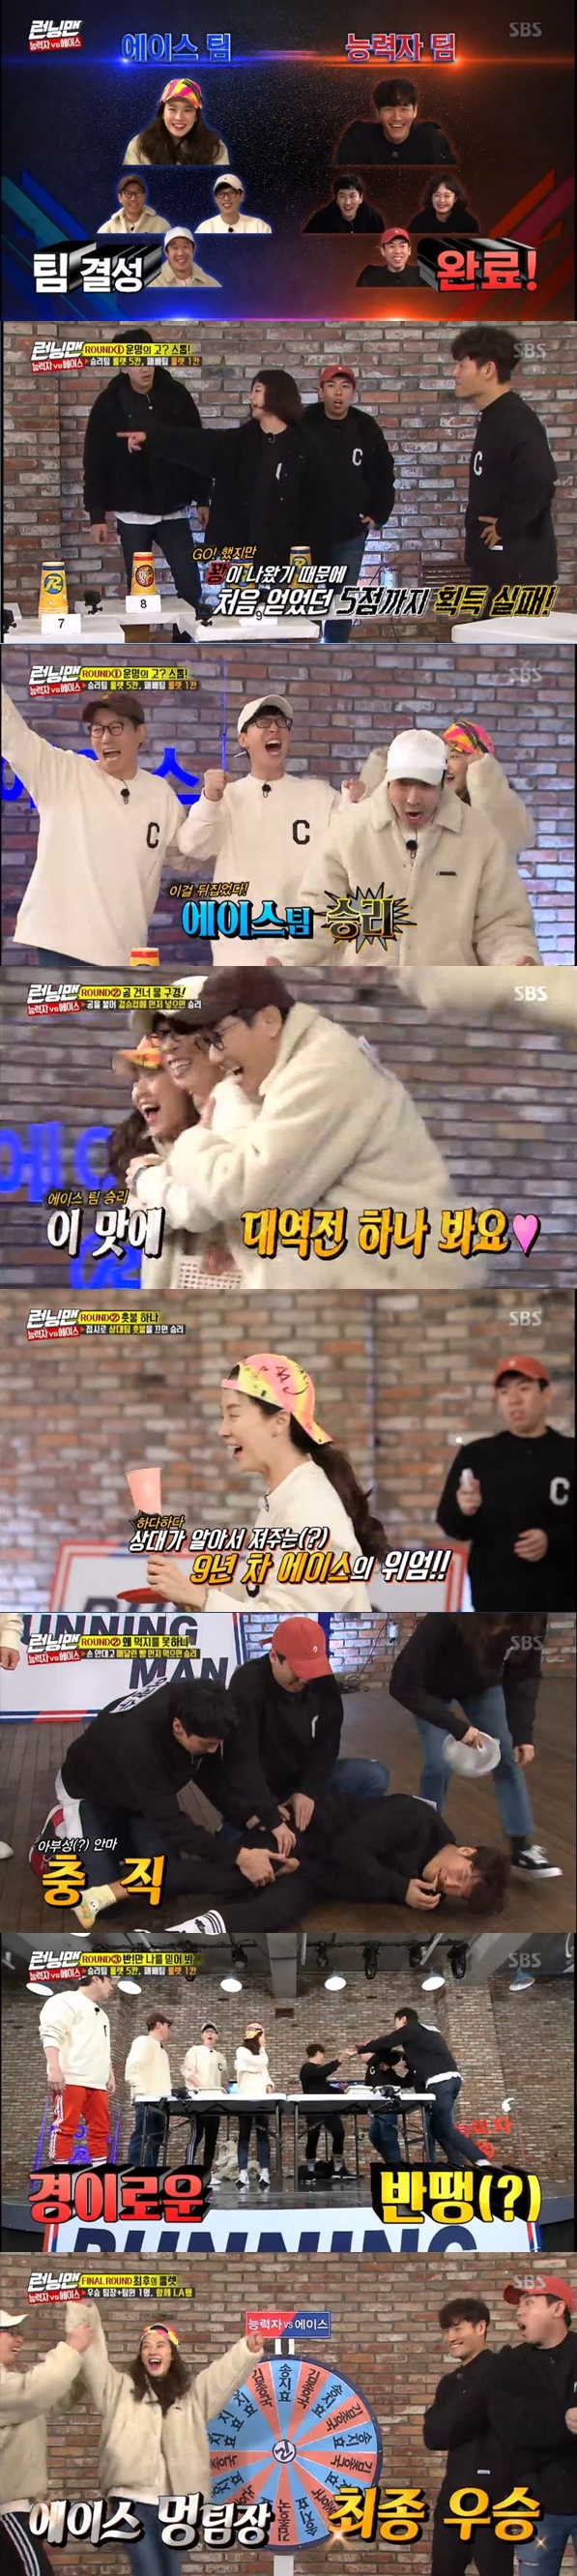 Kim Jong-kook and Song Ji-hyo, who won the joint championship at the level-up race in the SBS entertainment program Running Man broadcasted on the afternoon of the 10th, held a race to cover the final right Winners & Losers.The two decided to take the prize money received through the joint championship.If the two decided to share the prize money together, Race, which would have ended as it was, was transferred to the final race with Choices.Kim Jong-kook confirmed that Song Ji-hyo had Choices for single food and said, If we had Choices together, we could not afford the members teasing.The members formed a team by Choicesing one of the two; Kim Jong-kook and Song Ji-hyo both planned to go to L.A. through the winning prize money.The members confirmed their L.A. plans and Choices the team; in the winning team, the team leader was able to take one of the team members to Choices and get the benefit of leaving for L.A. together.Kim Jong-kook and Song Ji-hyos travel plans were divided into extremes; Kim Jong-kook introduced a tight schedule, saying, When we get to L.A., well eat from Korean food.Yoo Jae-Suk laughed, saying, I will be tired when I go to the end. On the other hand, Song Ji-hyo said, I want to travel free from L.A.Yoo Jae-Suk, Ji Suk-jin, Hahaha played Song Ji-hyo, Jeon So-min, Lee Kwang-soo, and Yang Se-chan played Kim Jong-kook Choices.The first confrontation between Ace and Ace began with a quiz that Kim Jong-kook is good at and a mixed match of Song Ji-hyos good suit.Yoo Jae-Suk said, There are bangs gathered there, so we can turn it over at once even if we are wrong.In fact, the Kim Jong-kook team, who hit the first problem, scored five points in the first Choices but Choices Go, followed by a bang and failed to score.Song Ji-hyo, on the other hand, was also a lucky Ace.When I hit the first problem, I did not get a score because of the qangson Yoo Jae-Suk, but I got 10 points at a time with the opportunity to get the next problem in a row.However, in the ongoing quiz, Running Man official kanson Lee Kwang-soo and Yoo Jae-Suk did not score.Kim Jong-kooks team turned the game over at once.Kim Jong-kook, who found out that there was no bang at four times due to the performance of the two bangs, scored 15 points at a time and reversed the game.The team that took the quiz in the last game, which was held by five points, was the Song Ji-hyo team.Team members believed entirely in Song Ji-hyo, and she rewarded the teams faith by winning six points.In the second round, the team members played a 1:1 match with roulette Khansu, who decided on the final right Winners & Losers for each event.The first matchup to move the ball to the water cup was met by Lee Kwang-soo and Yoo Jae-Suk; the members expected the two mens names to be called dirty Game.The two went on to the game with fouls repeatedly; in a game that became their own game with excessive fouls, Yoo Jae-Suk sent the ball to the final spot first to lead the team to victory.In the second round of the second round, Jeon So-min and Song Ji-hyo faced each other.The second event was a game in which the person who first turned off the opponents candles with a plate became the Winners & Losers.Song Ji-hyo, who had never been defeated by Jeon So-min in the opponent, won again after turning off the candle of Jeon So-min first in this match.Kim Jong-kook and Ji Suk-jin came out as the final runners-up; Kim Jong-kook went on to face off with an upset feeling that none of his teammates could get Yi Gi.The event where the two confronted was a game where the person who ate the hanging bread first became the Winners & Losers.Kim Jong-kook won the final showdown, eating bread at a repressive pace; however, Roulettes Kansu was played by the Ace team with nine-cars and three-cars.In the last half-half-splitting game, Kim Jong-kooks team won five roulettes and made a parasitic life.As a result, the Song Ji-hyo team won 10 spaces in the final roulette, and Kim Jong-kook team won 8 spaces.Song Ji-hyo and Kim Jong-kook turned the final roulette together, and the last arrow stopped was Song Ji-hyos compartment.Song Ji-hyo has won the L.A. travel ticket.